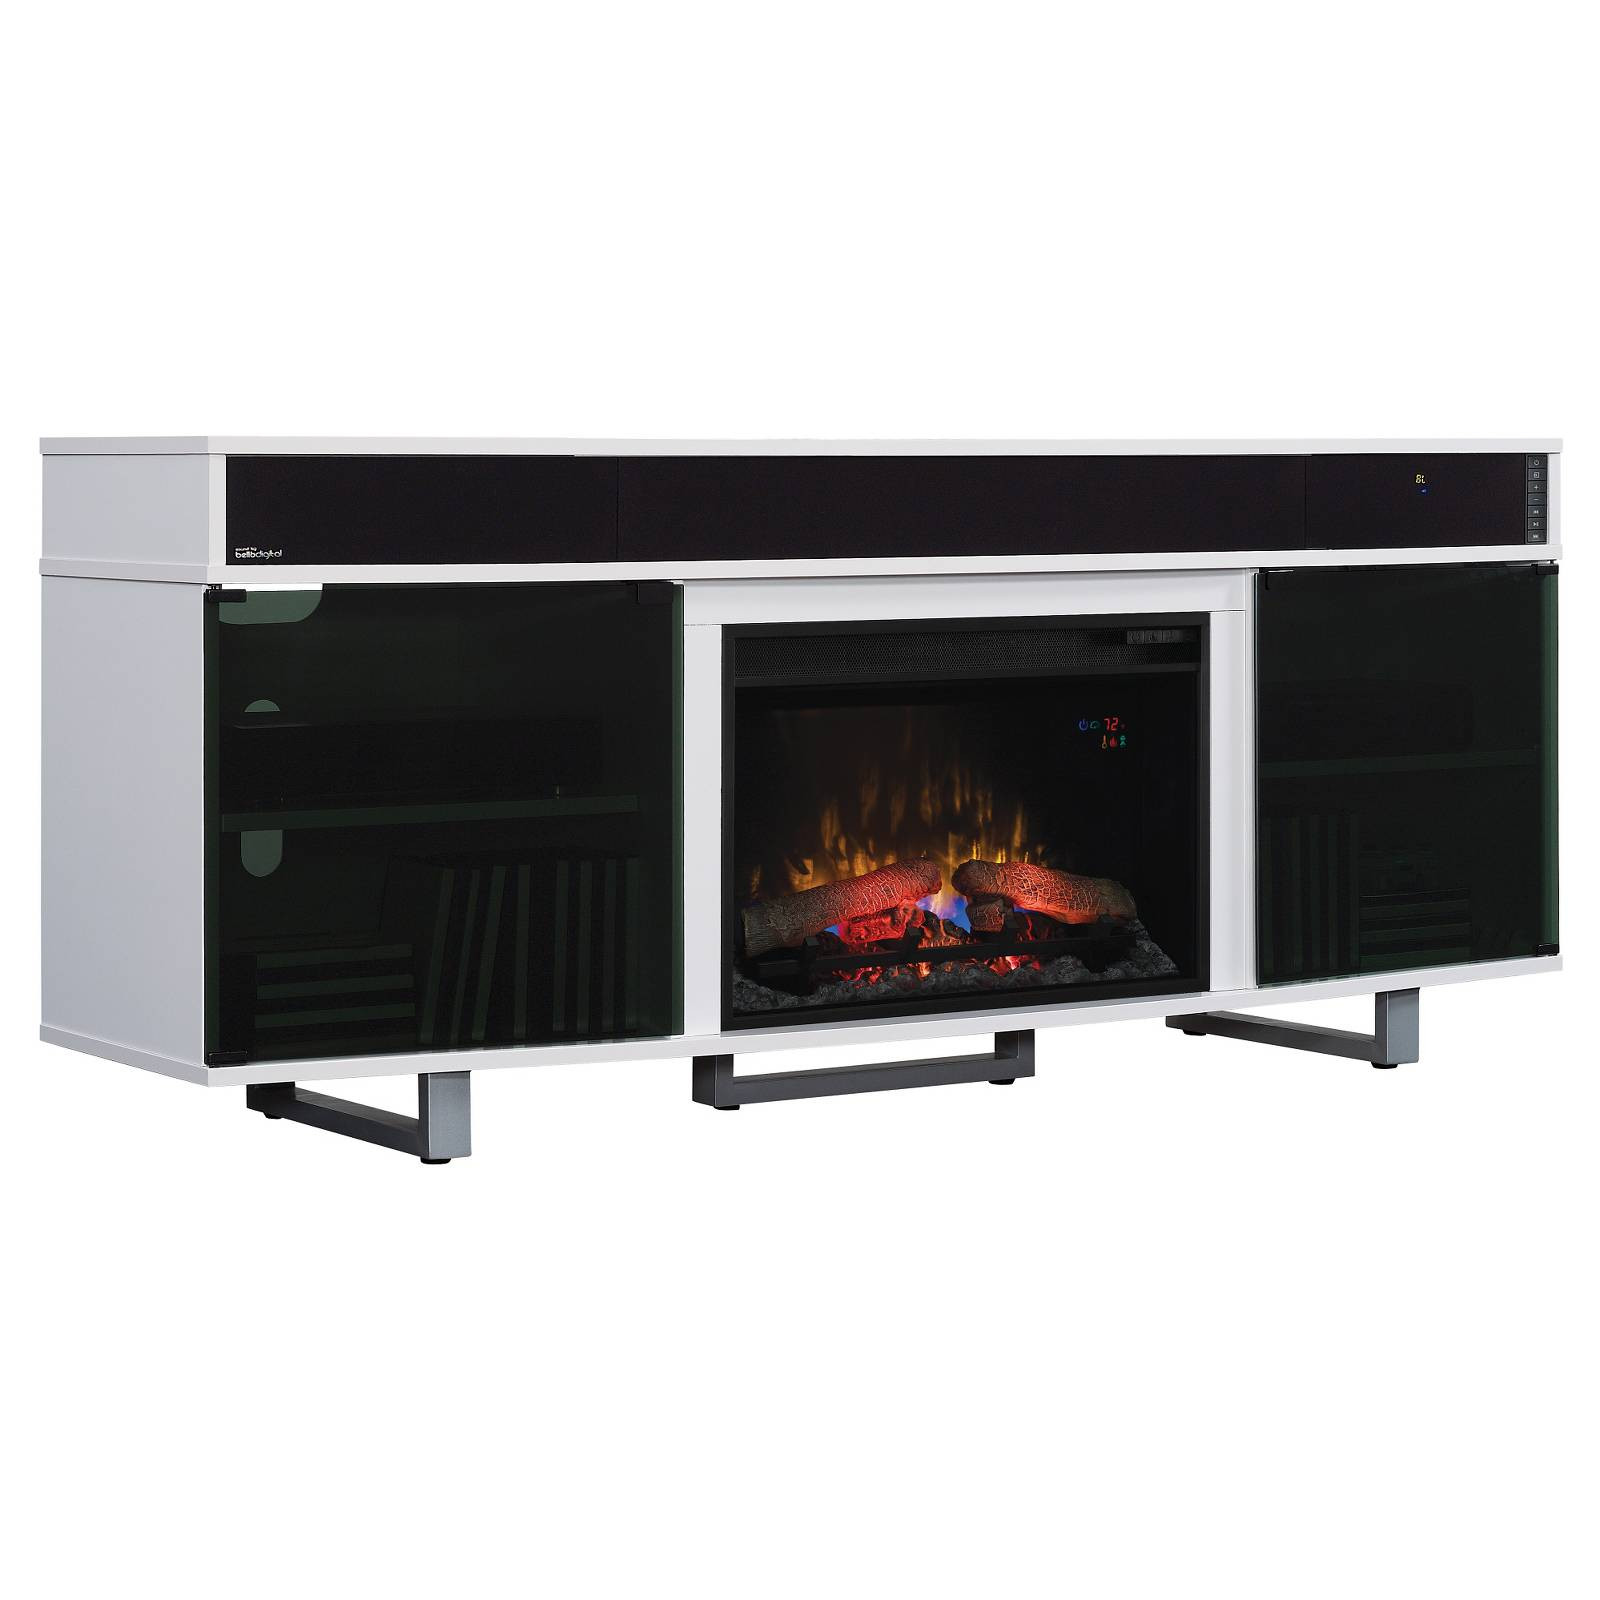 Electric Fireplace With Speakers
 Enterprise TV Stand with Speakers and Electric Fireplace